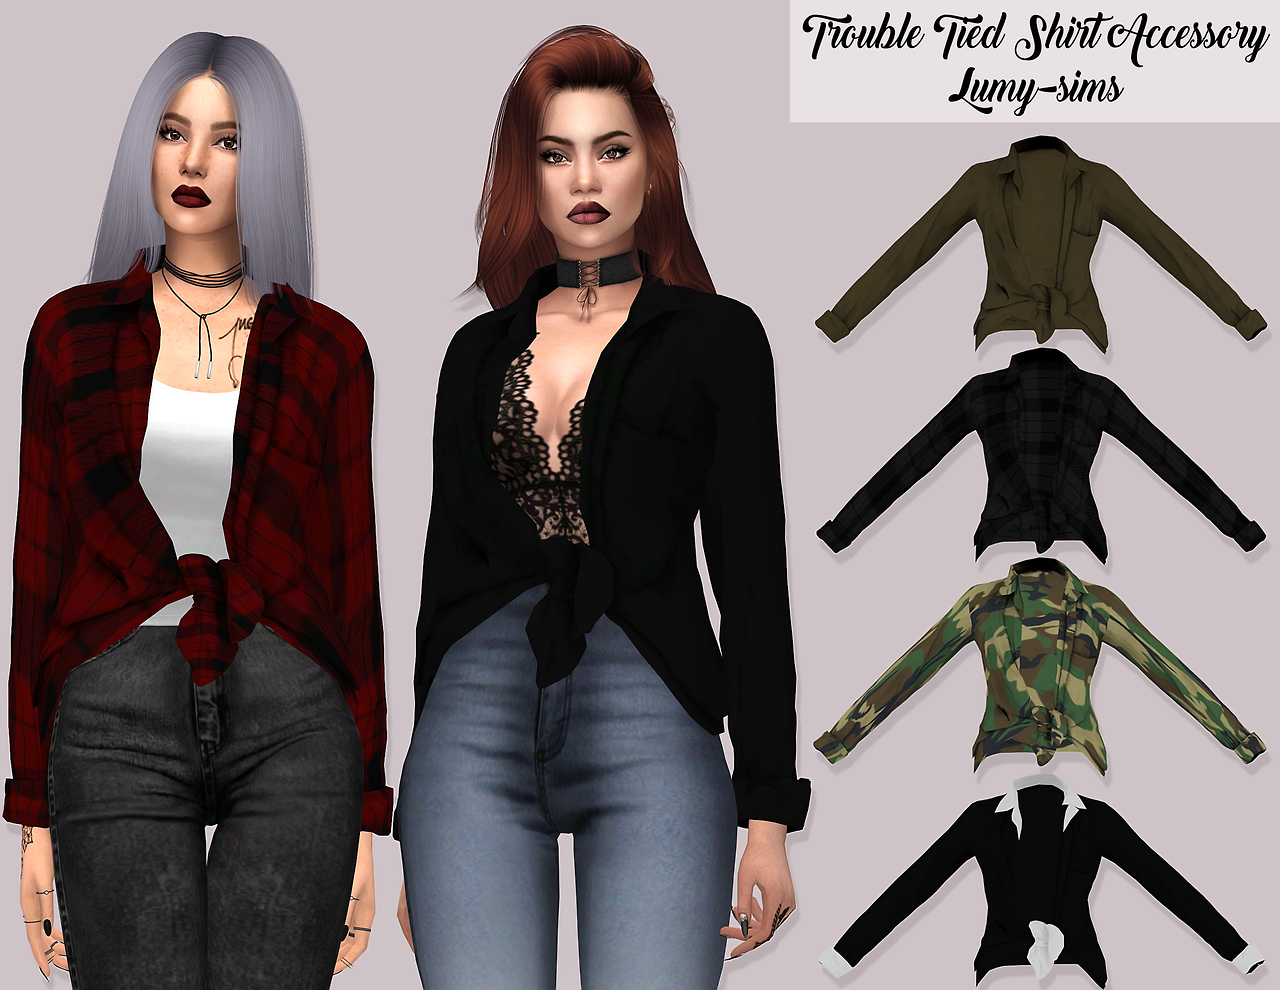 Sims 4 CC's - The Best: Trouble Tied Shirt Accessory by Lumy Sims